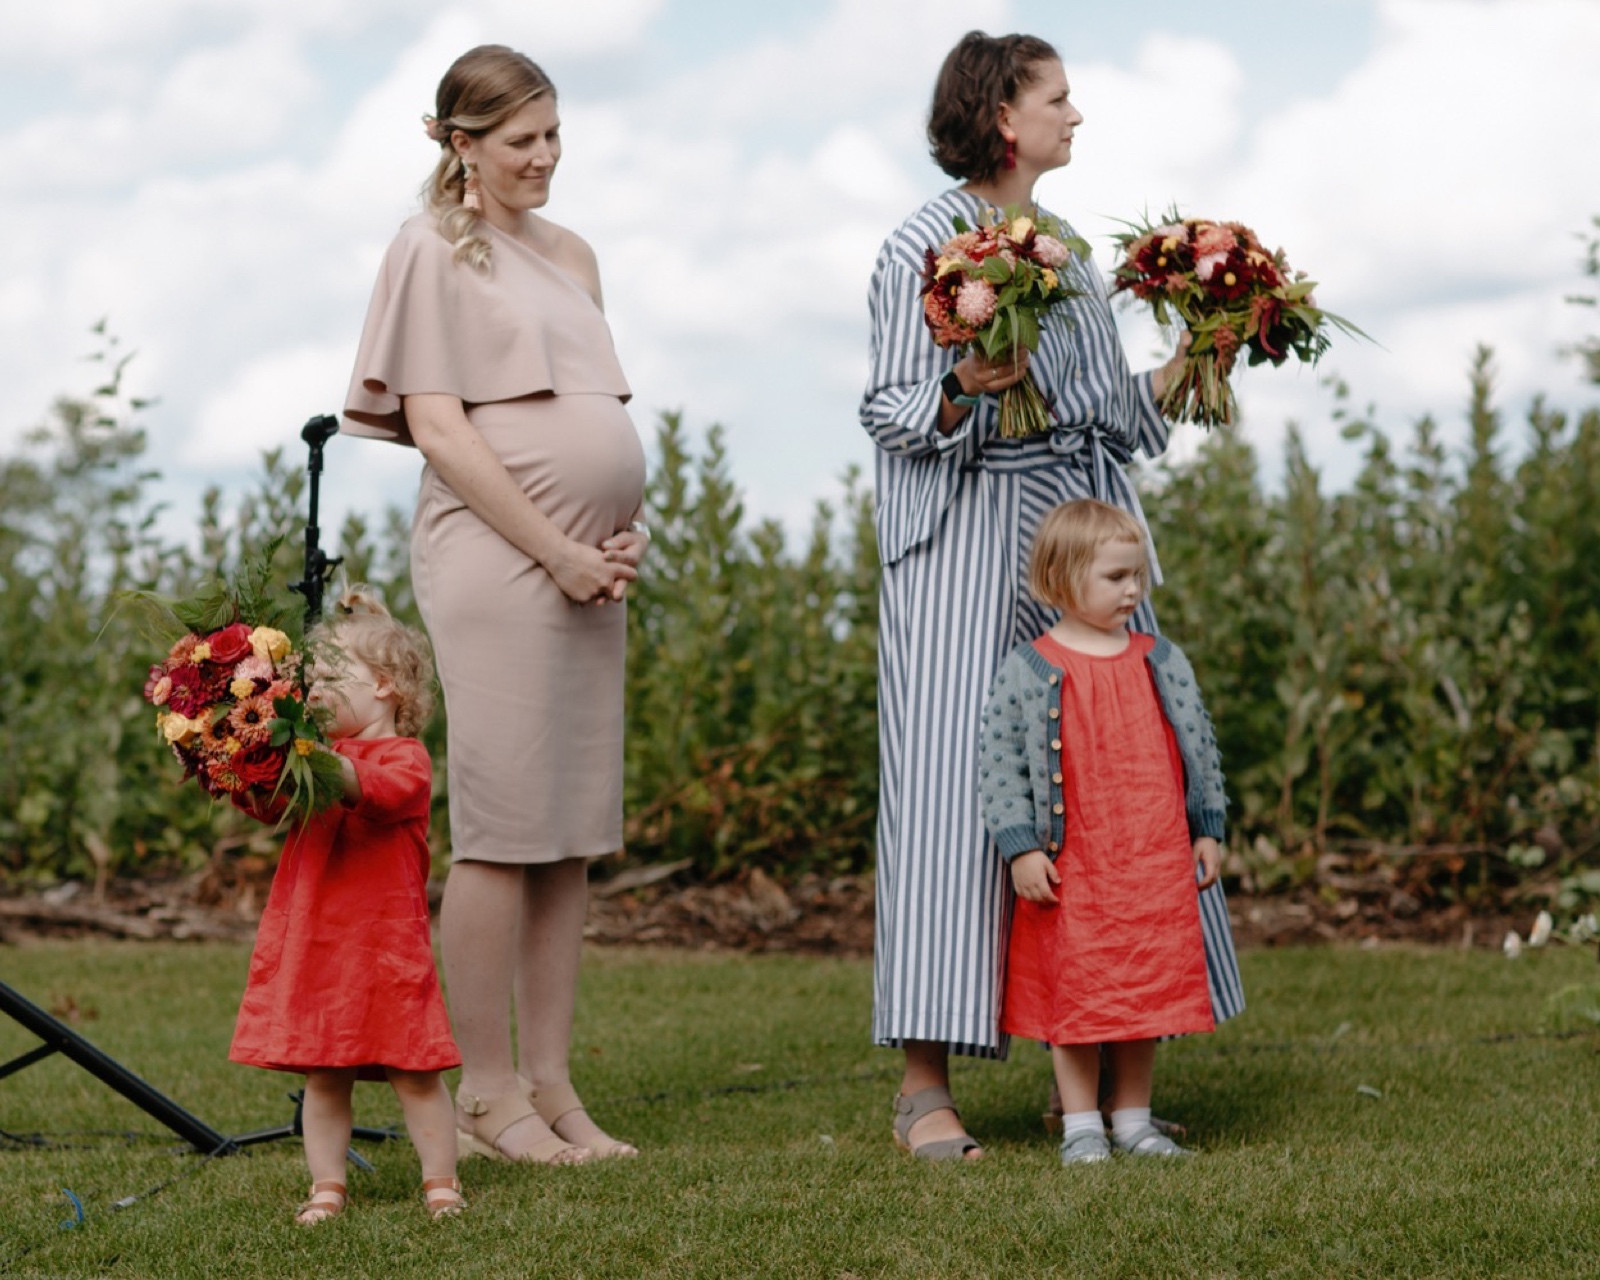 Flower girls in home-made red frocks reminiscent of 1920s